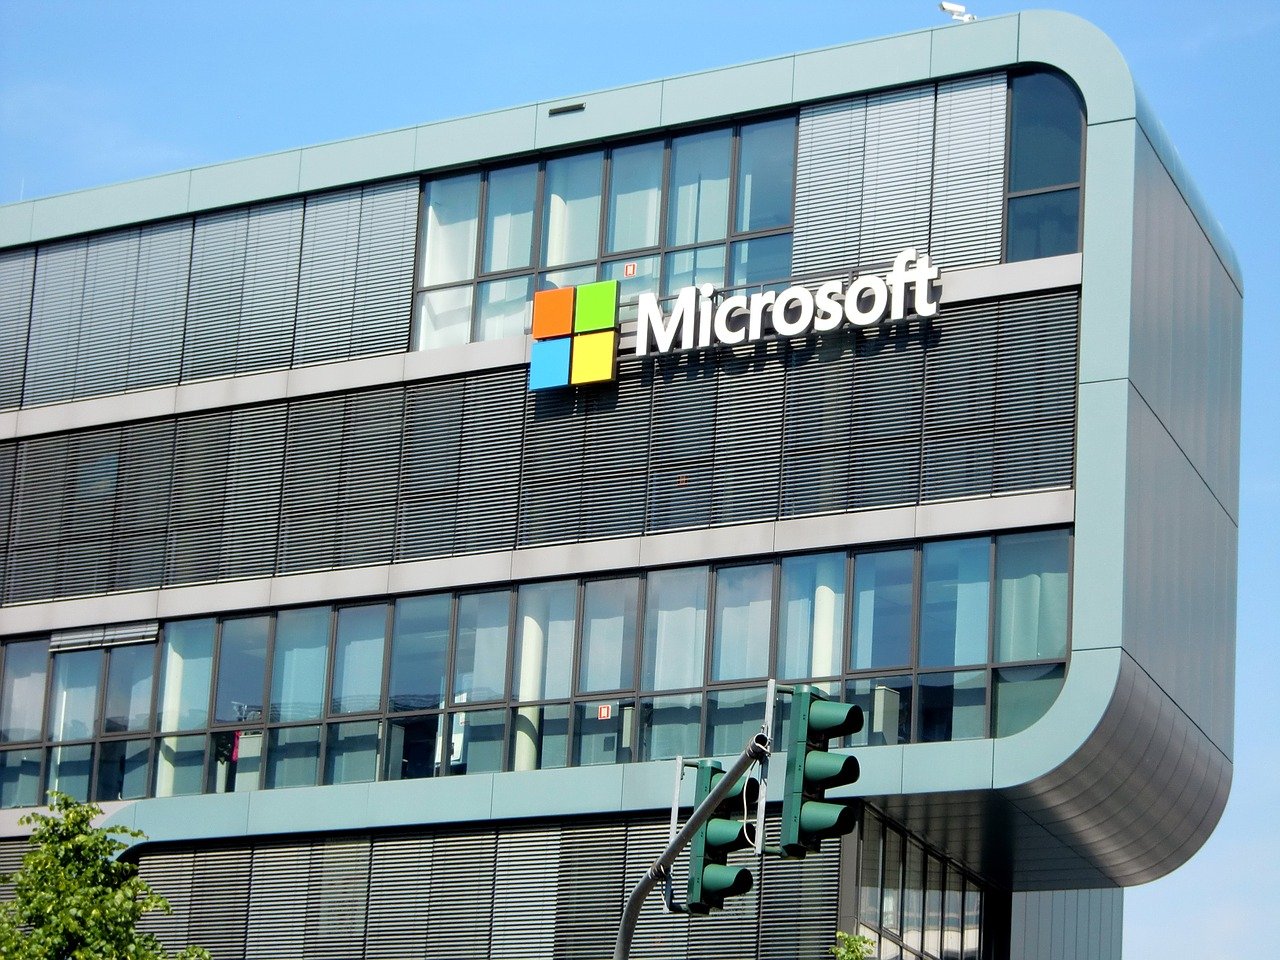 Microsoft: Hire Law Firm To Investigate Sexual Harassment Cases In Response To Investors ' Pressure